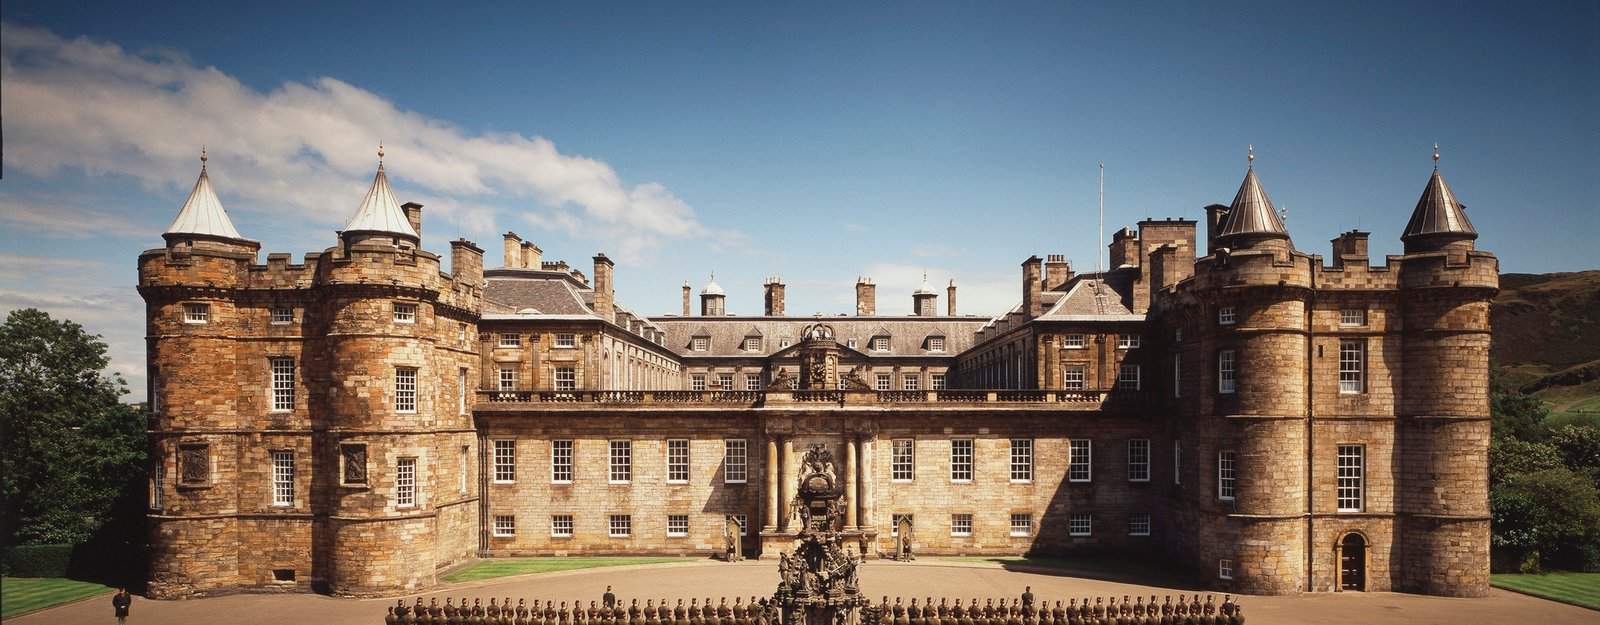 The Palace of Holyroodhouse in Edinburgh, the official residence of British kings in Scotland